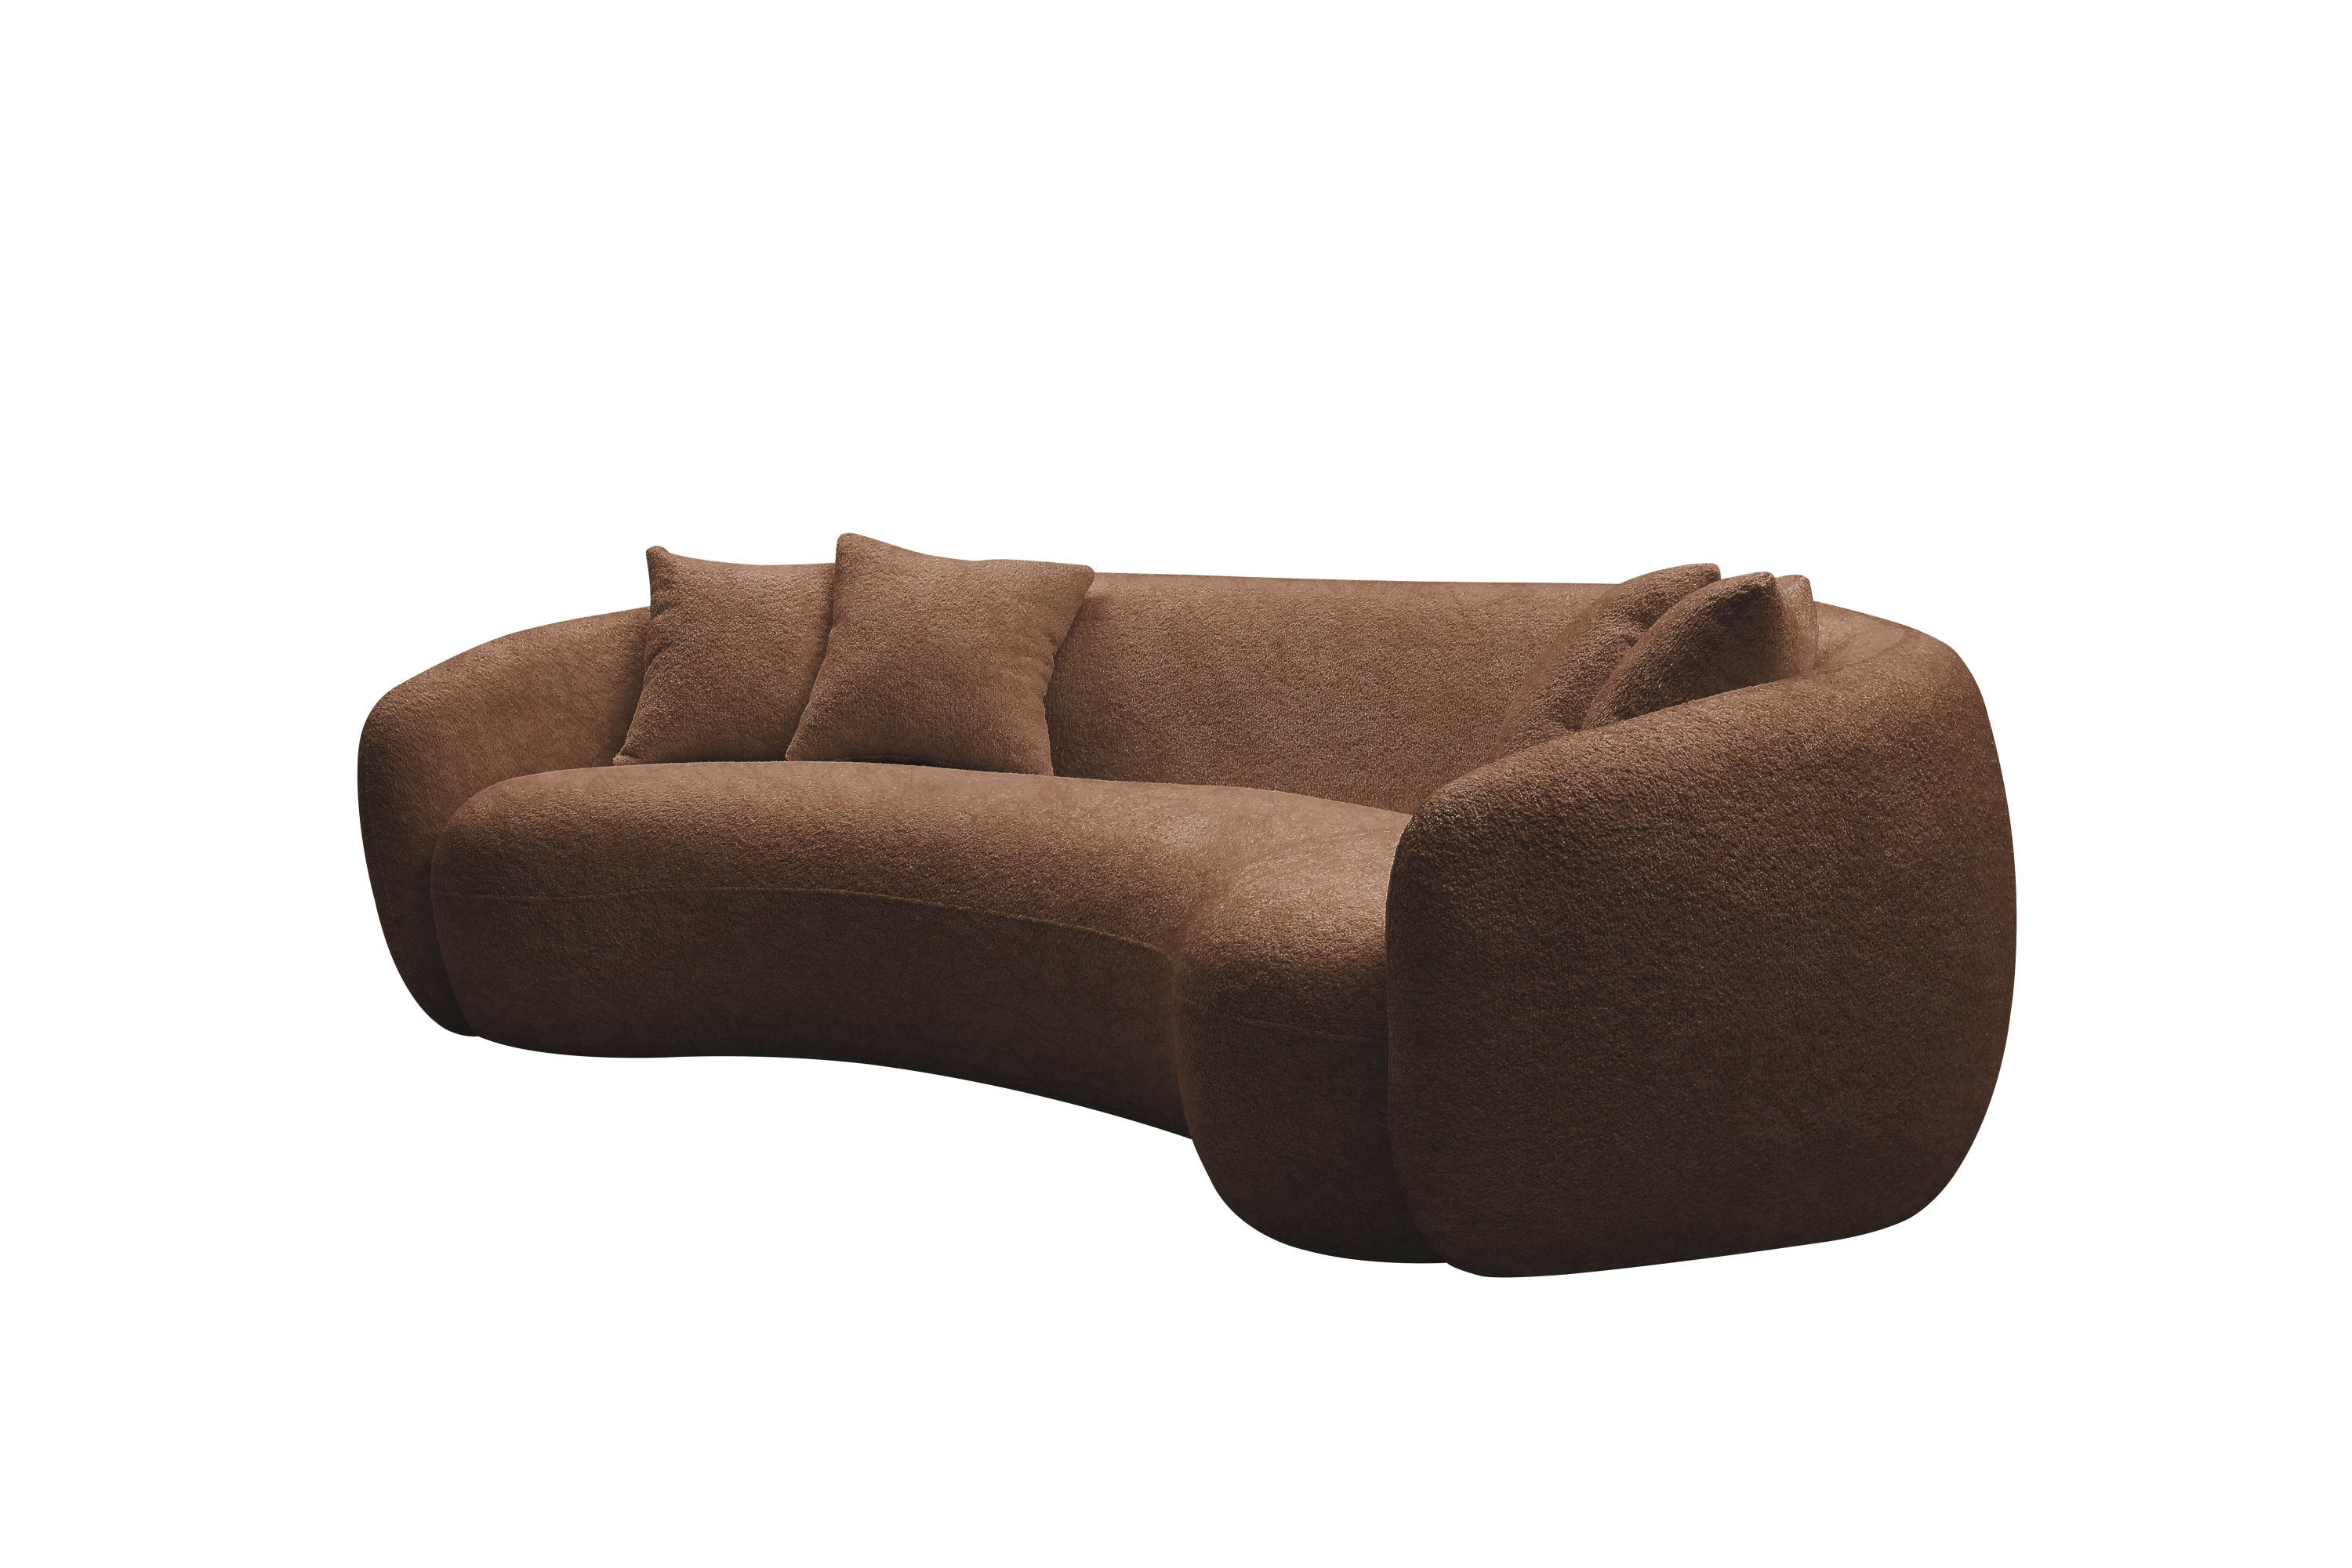 102'' 5-Seater Boucle Sofa Modern Sectional Half Moon Leisure Couch Curved Sofa - Teddy Fleece Brown